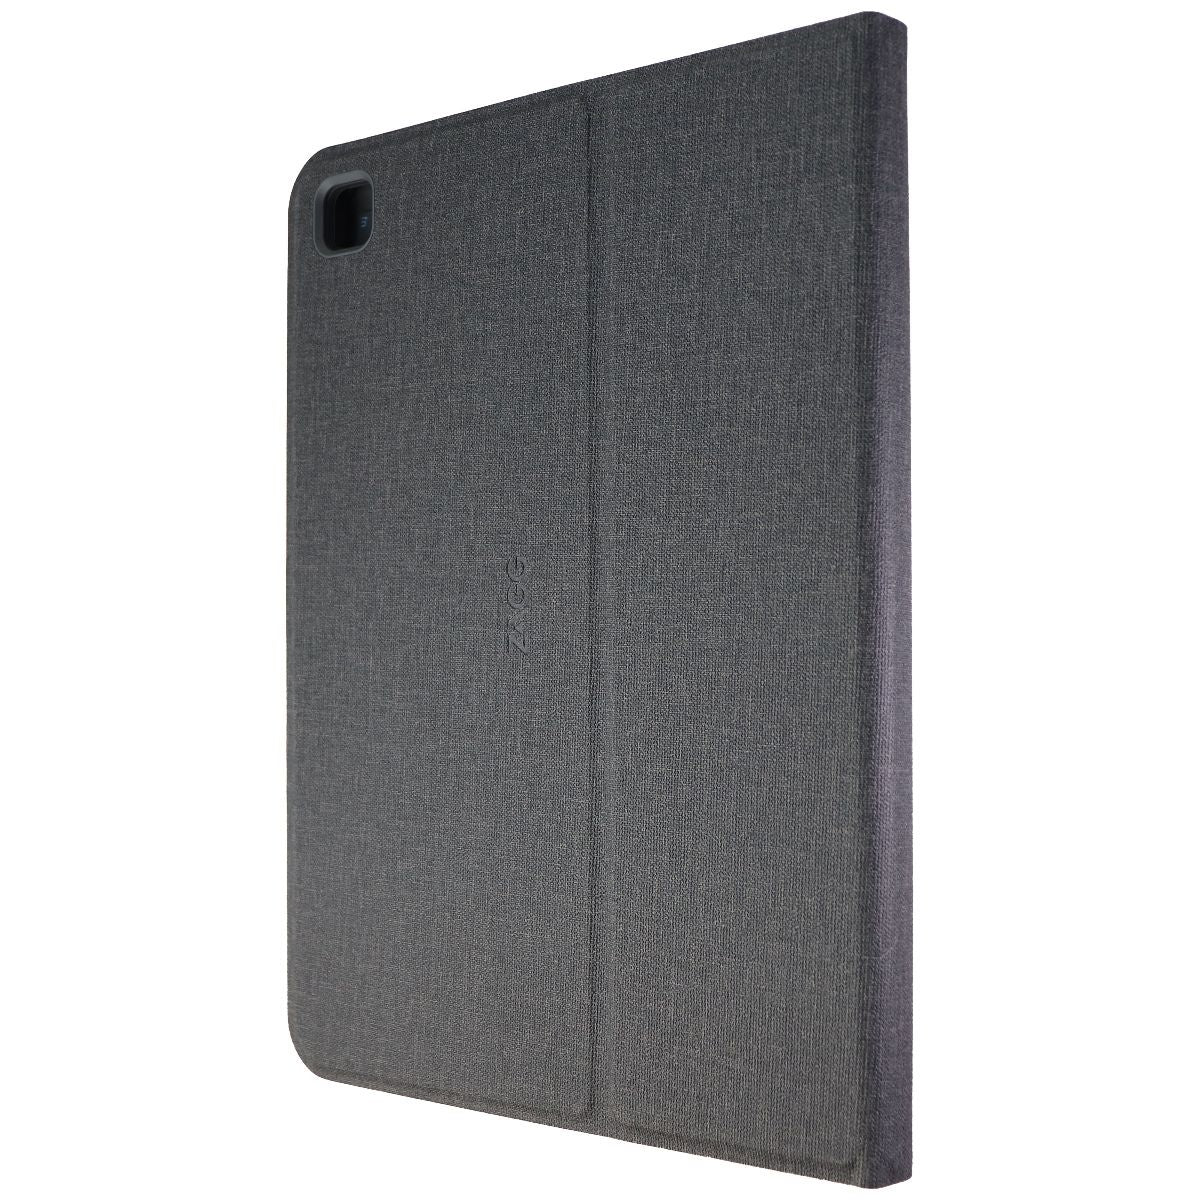 ZAGG Messenger Folio 2 Keyboard Case for iPad (10.2) / iPad (10.5) & Air 3 iPad/Tablet Accessories - Cases, Covers, Keyboard Folios Zagg    - Simple Cell Bulk Wholesale Pricing - USA Seller